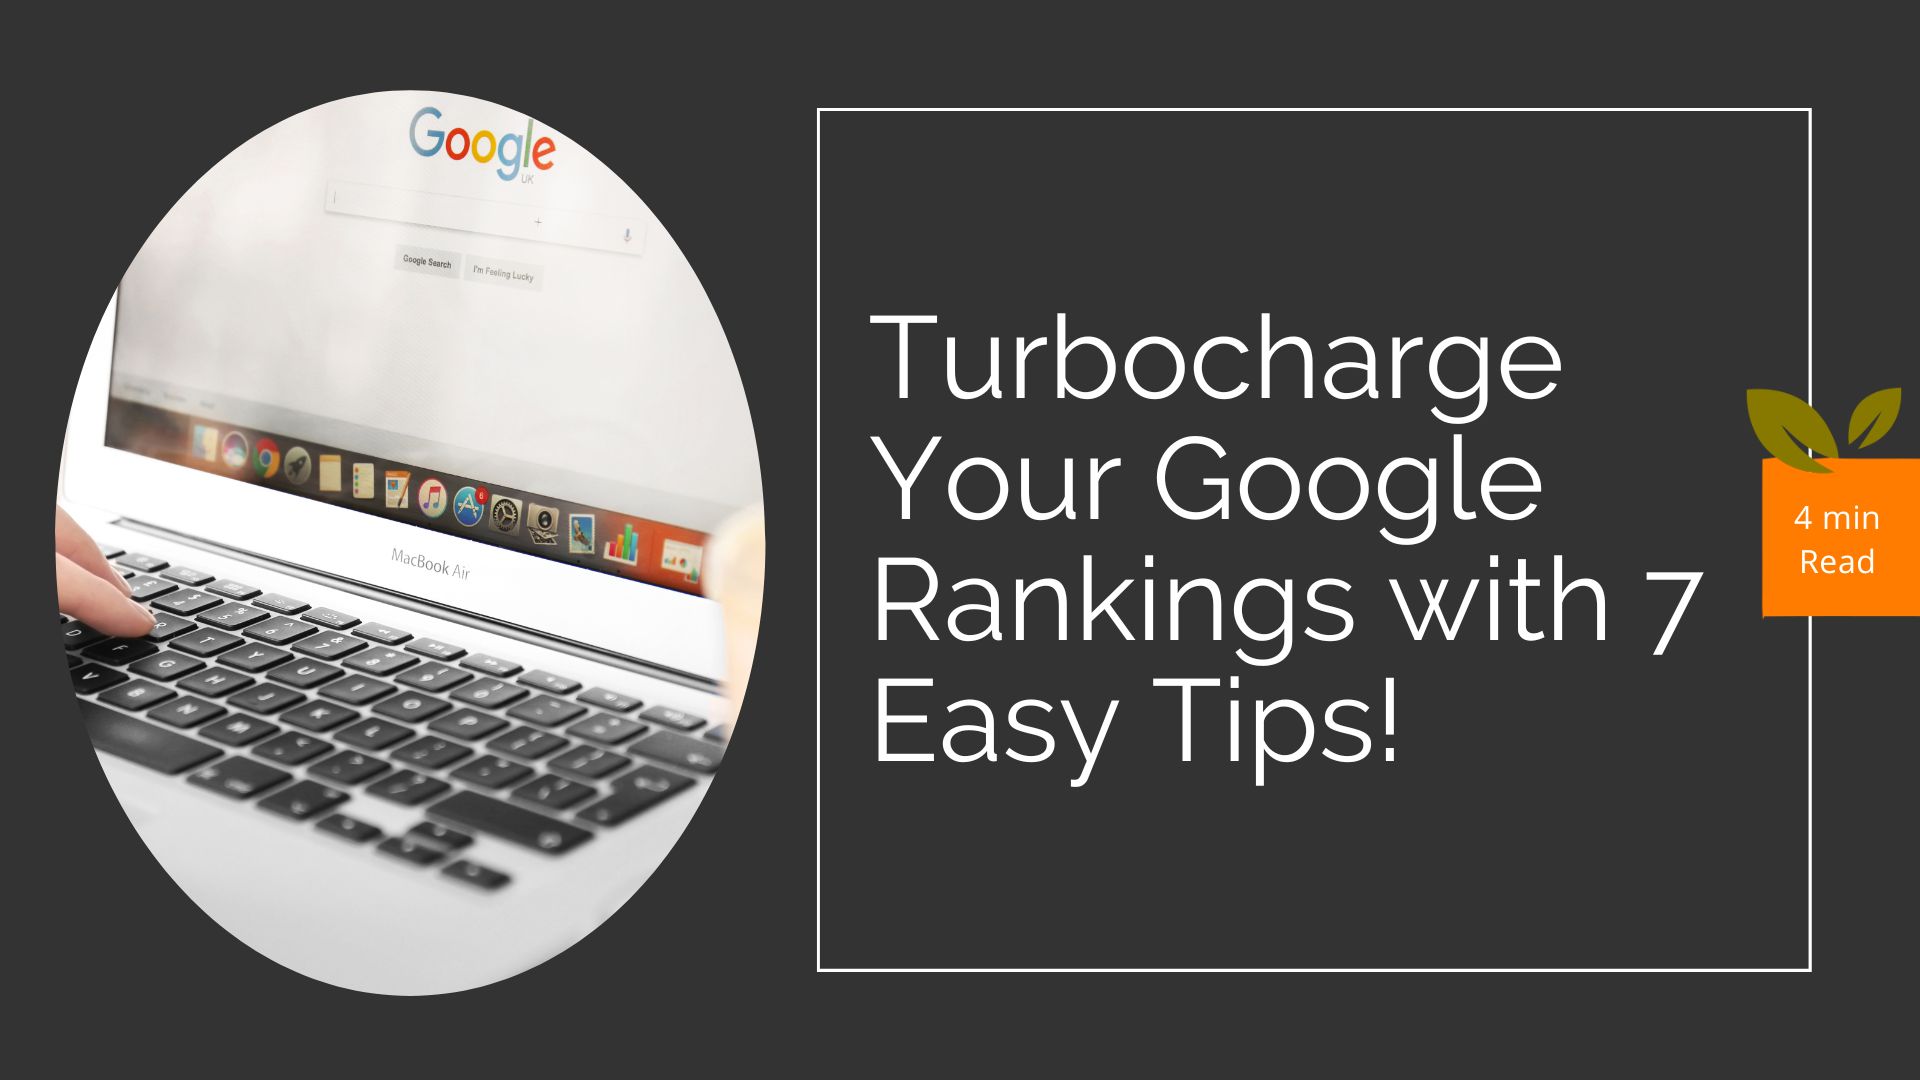 Turbocharge Your Google Rankings with 7 Easy Tips!